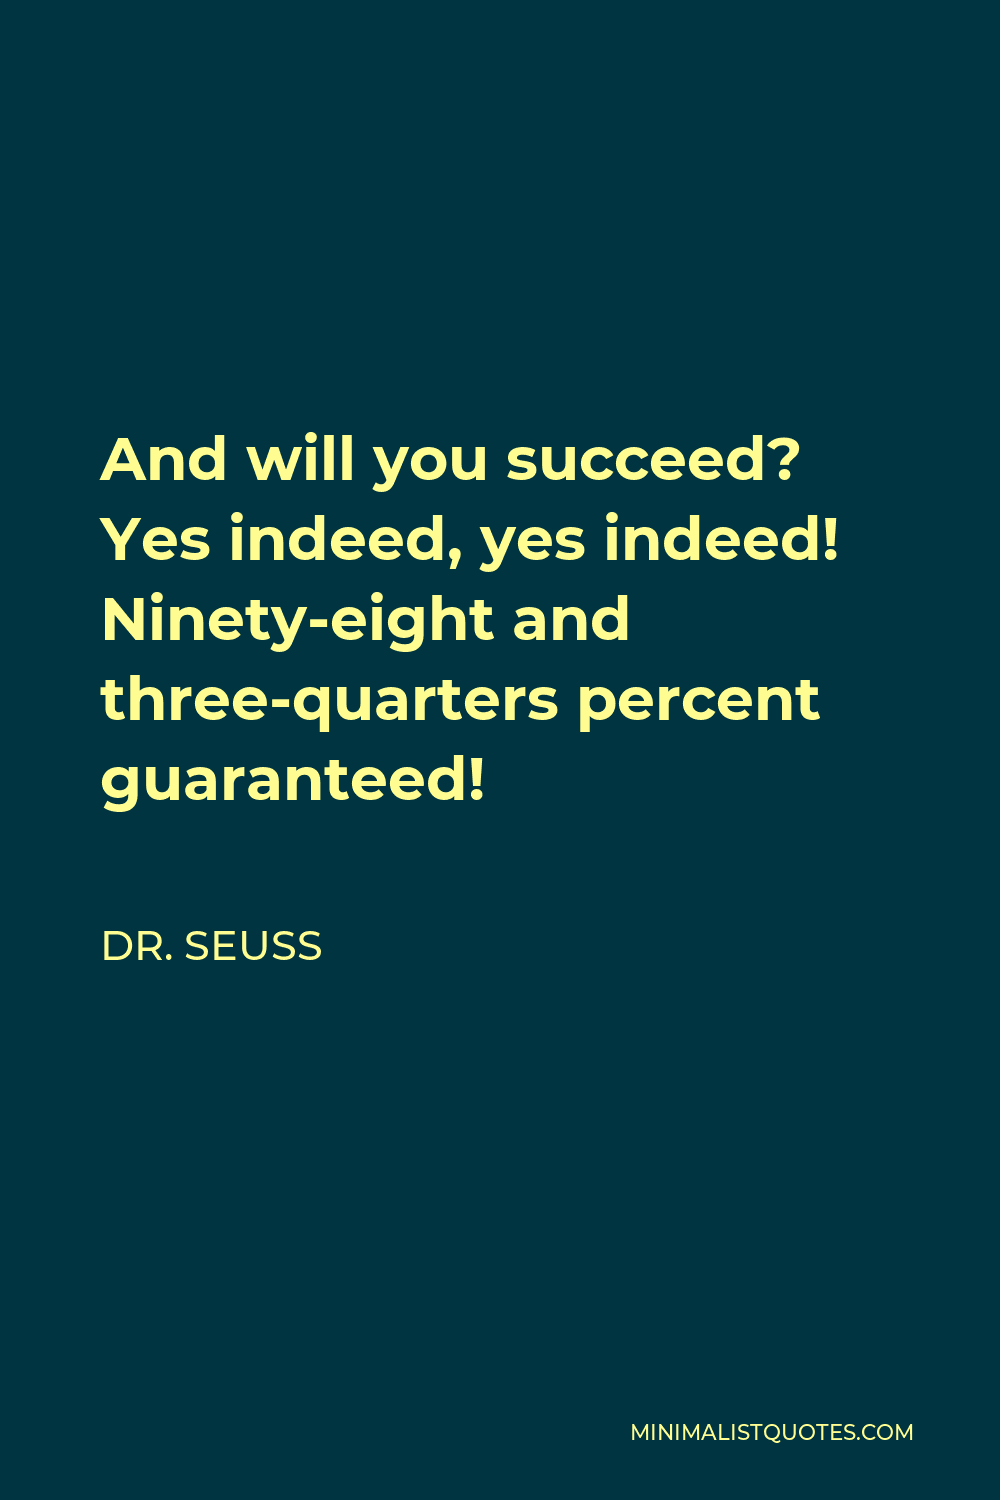 Dr. Seuss Quote - And will you succeed? Yes indeed, yes indeed! Ninety-eight and three-quarters percent guaranteed!